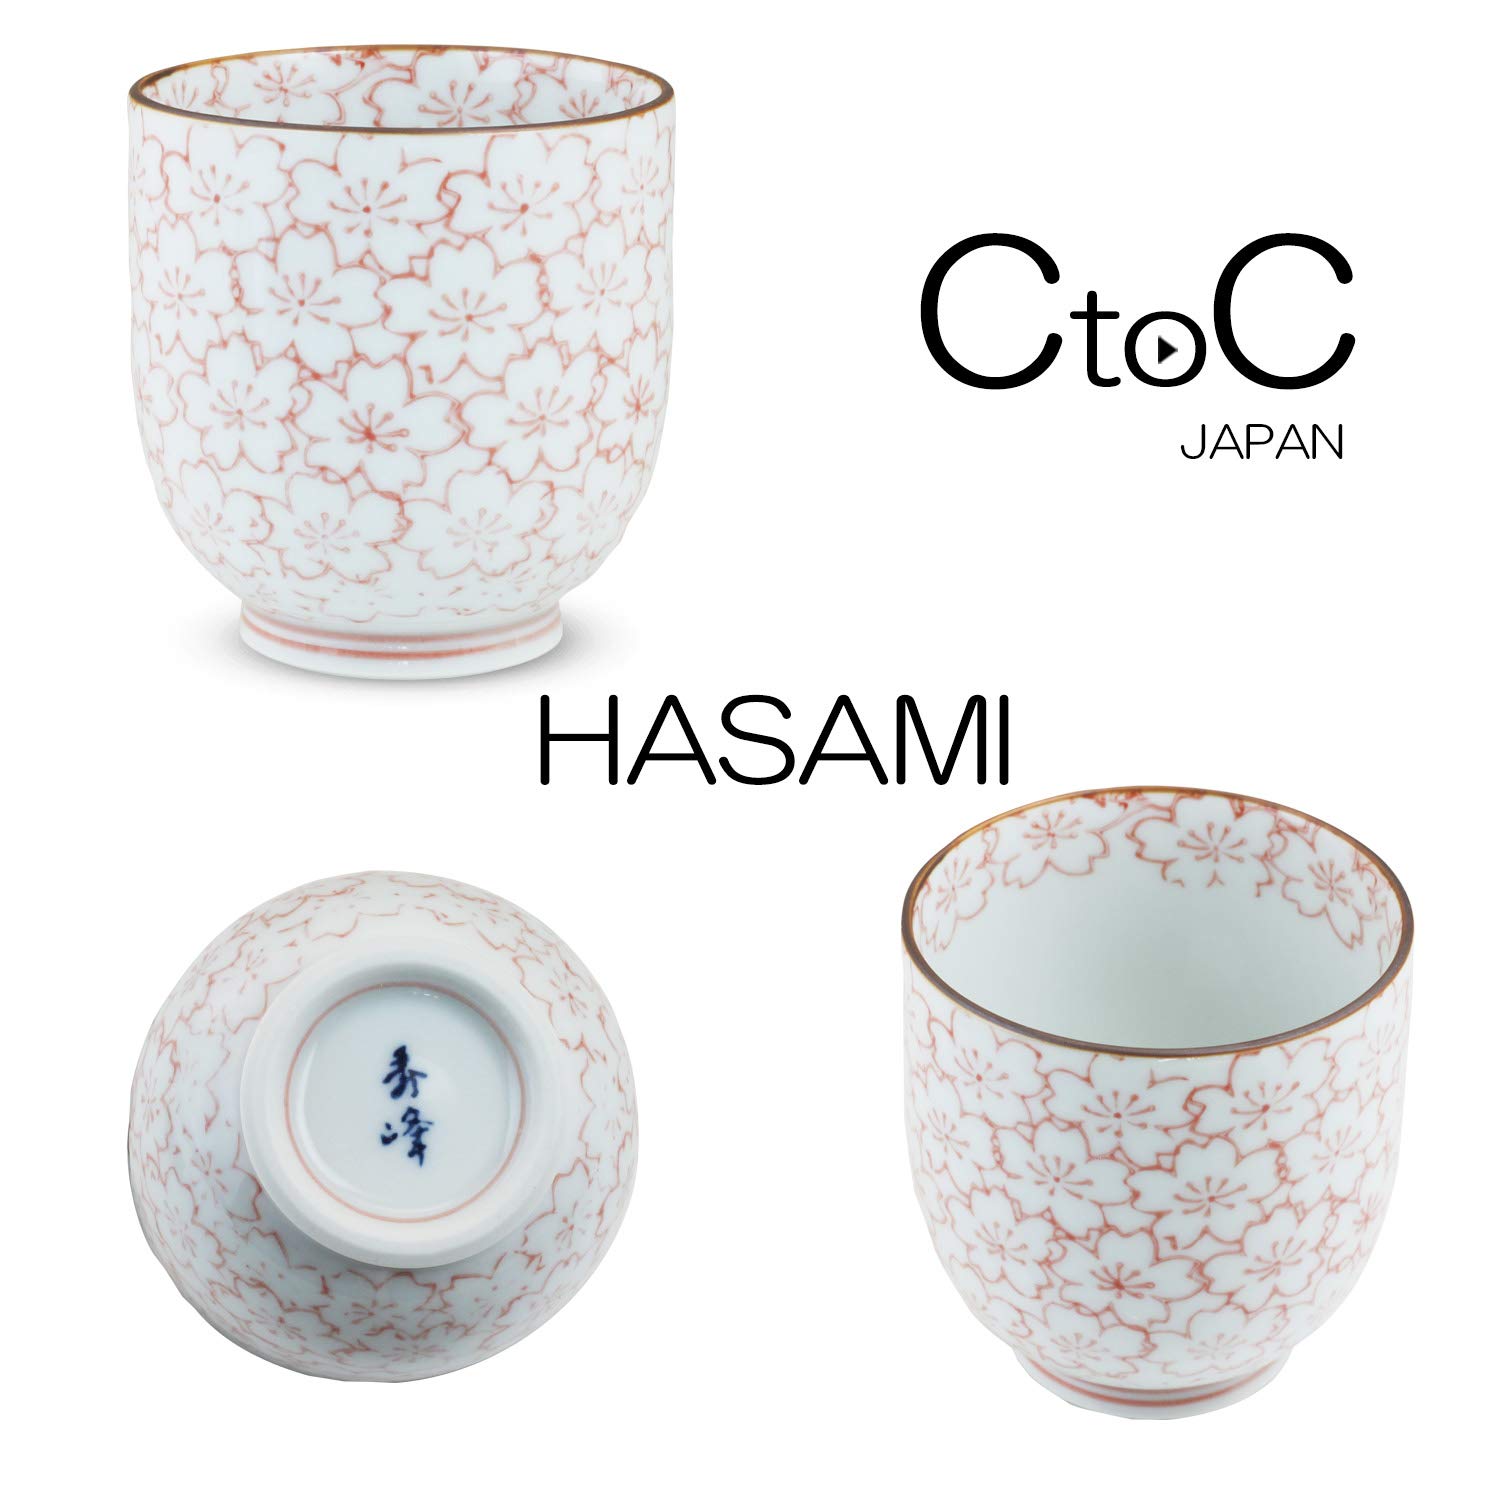 Ctoc Japan 896357 Teacup, Red, Φ2.8 x 3.2 inches (7 x 8.2 cm), Cup, Teacup, Hasami Yaki, Cherry Blossom, Small